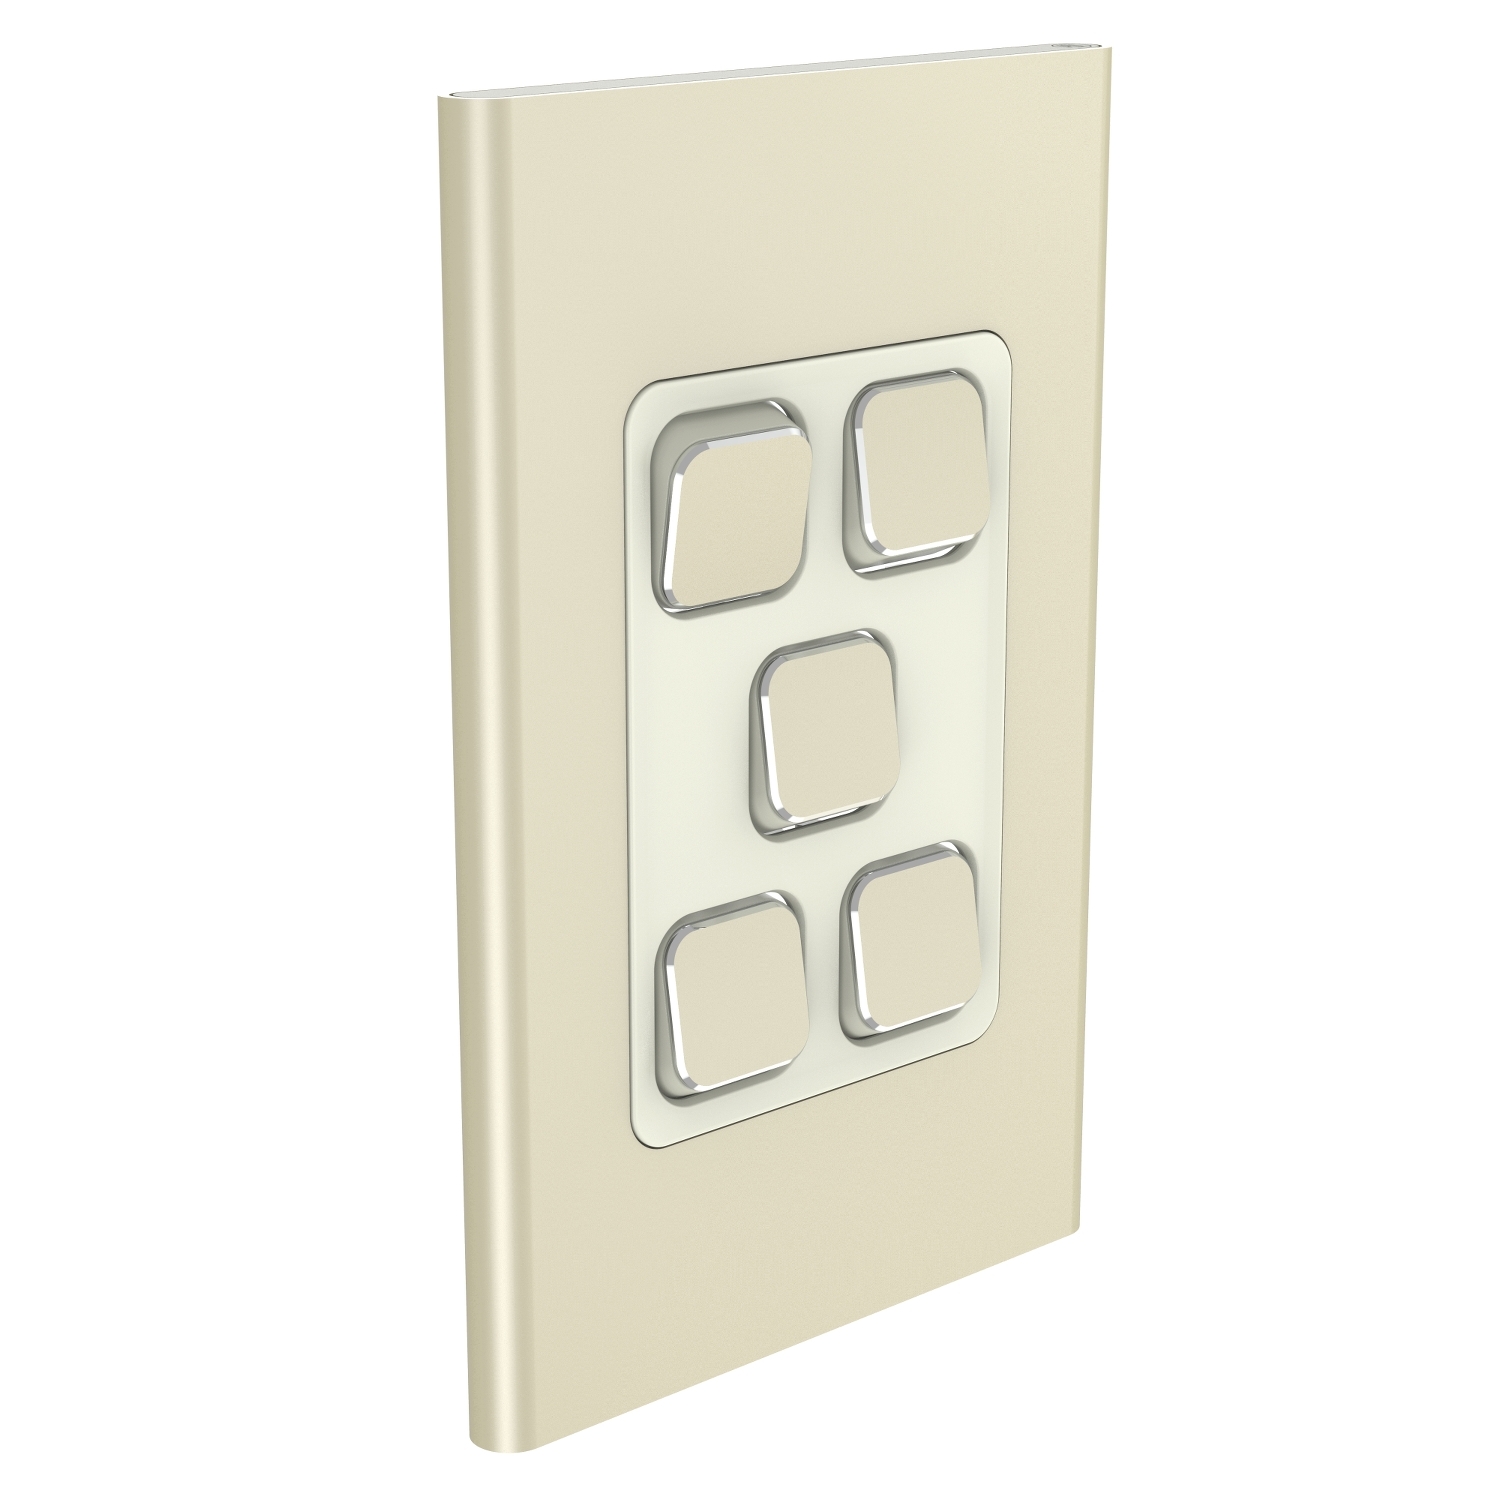 PDL Iconic Styl, cover frame, 5 switches, vertical - Crowne